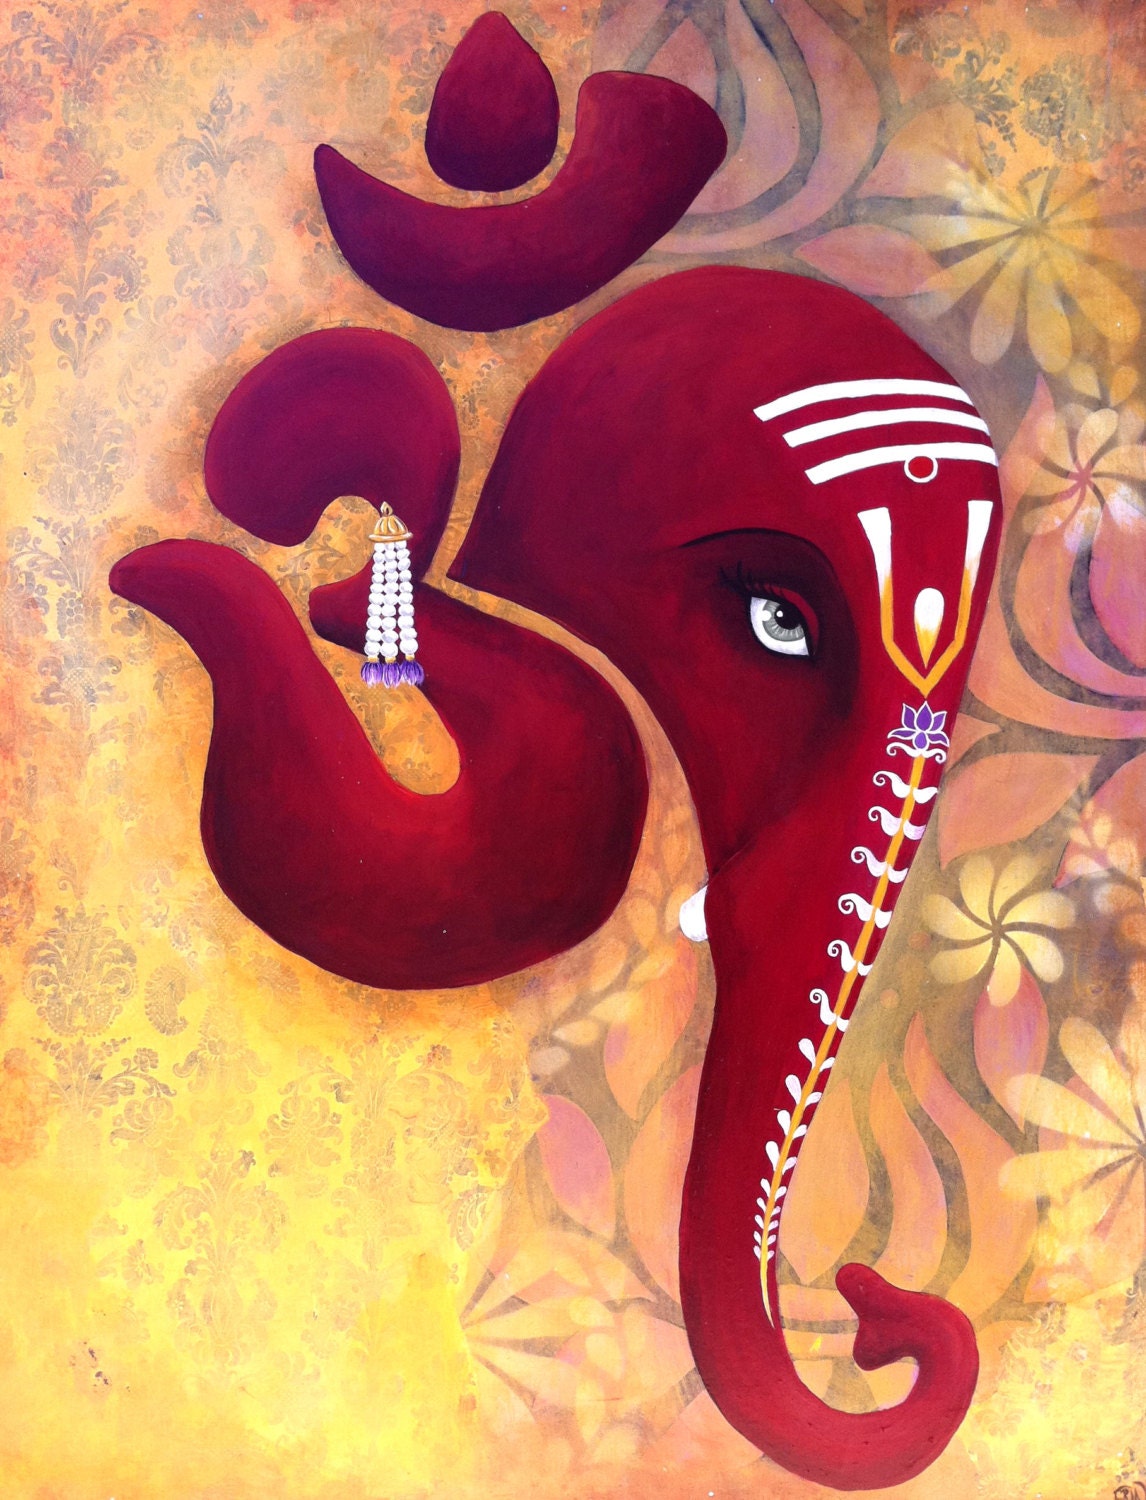 Print of a ganesh-om painting